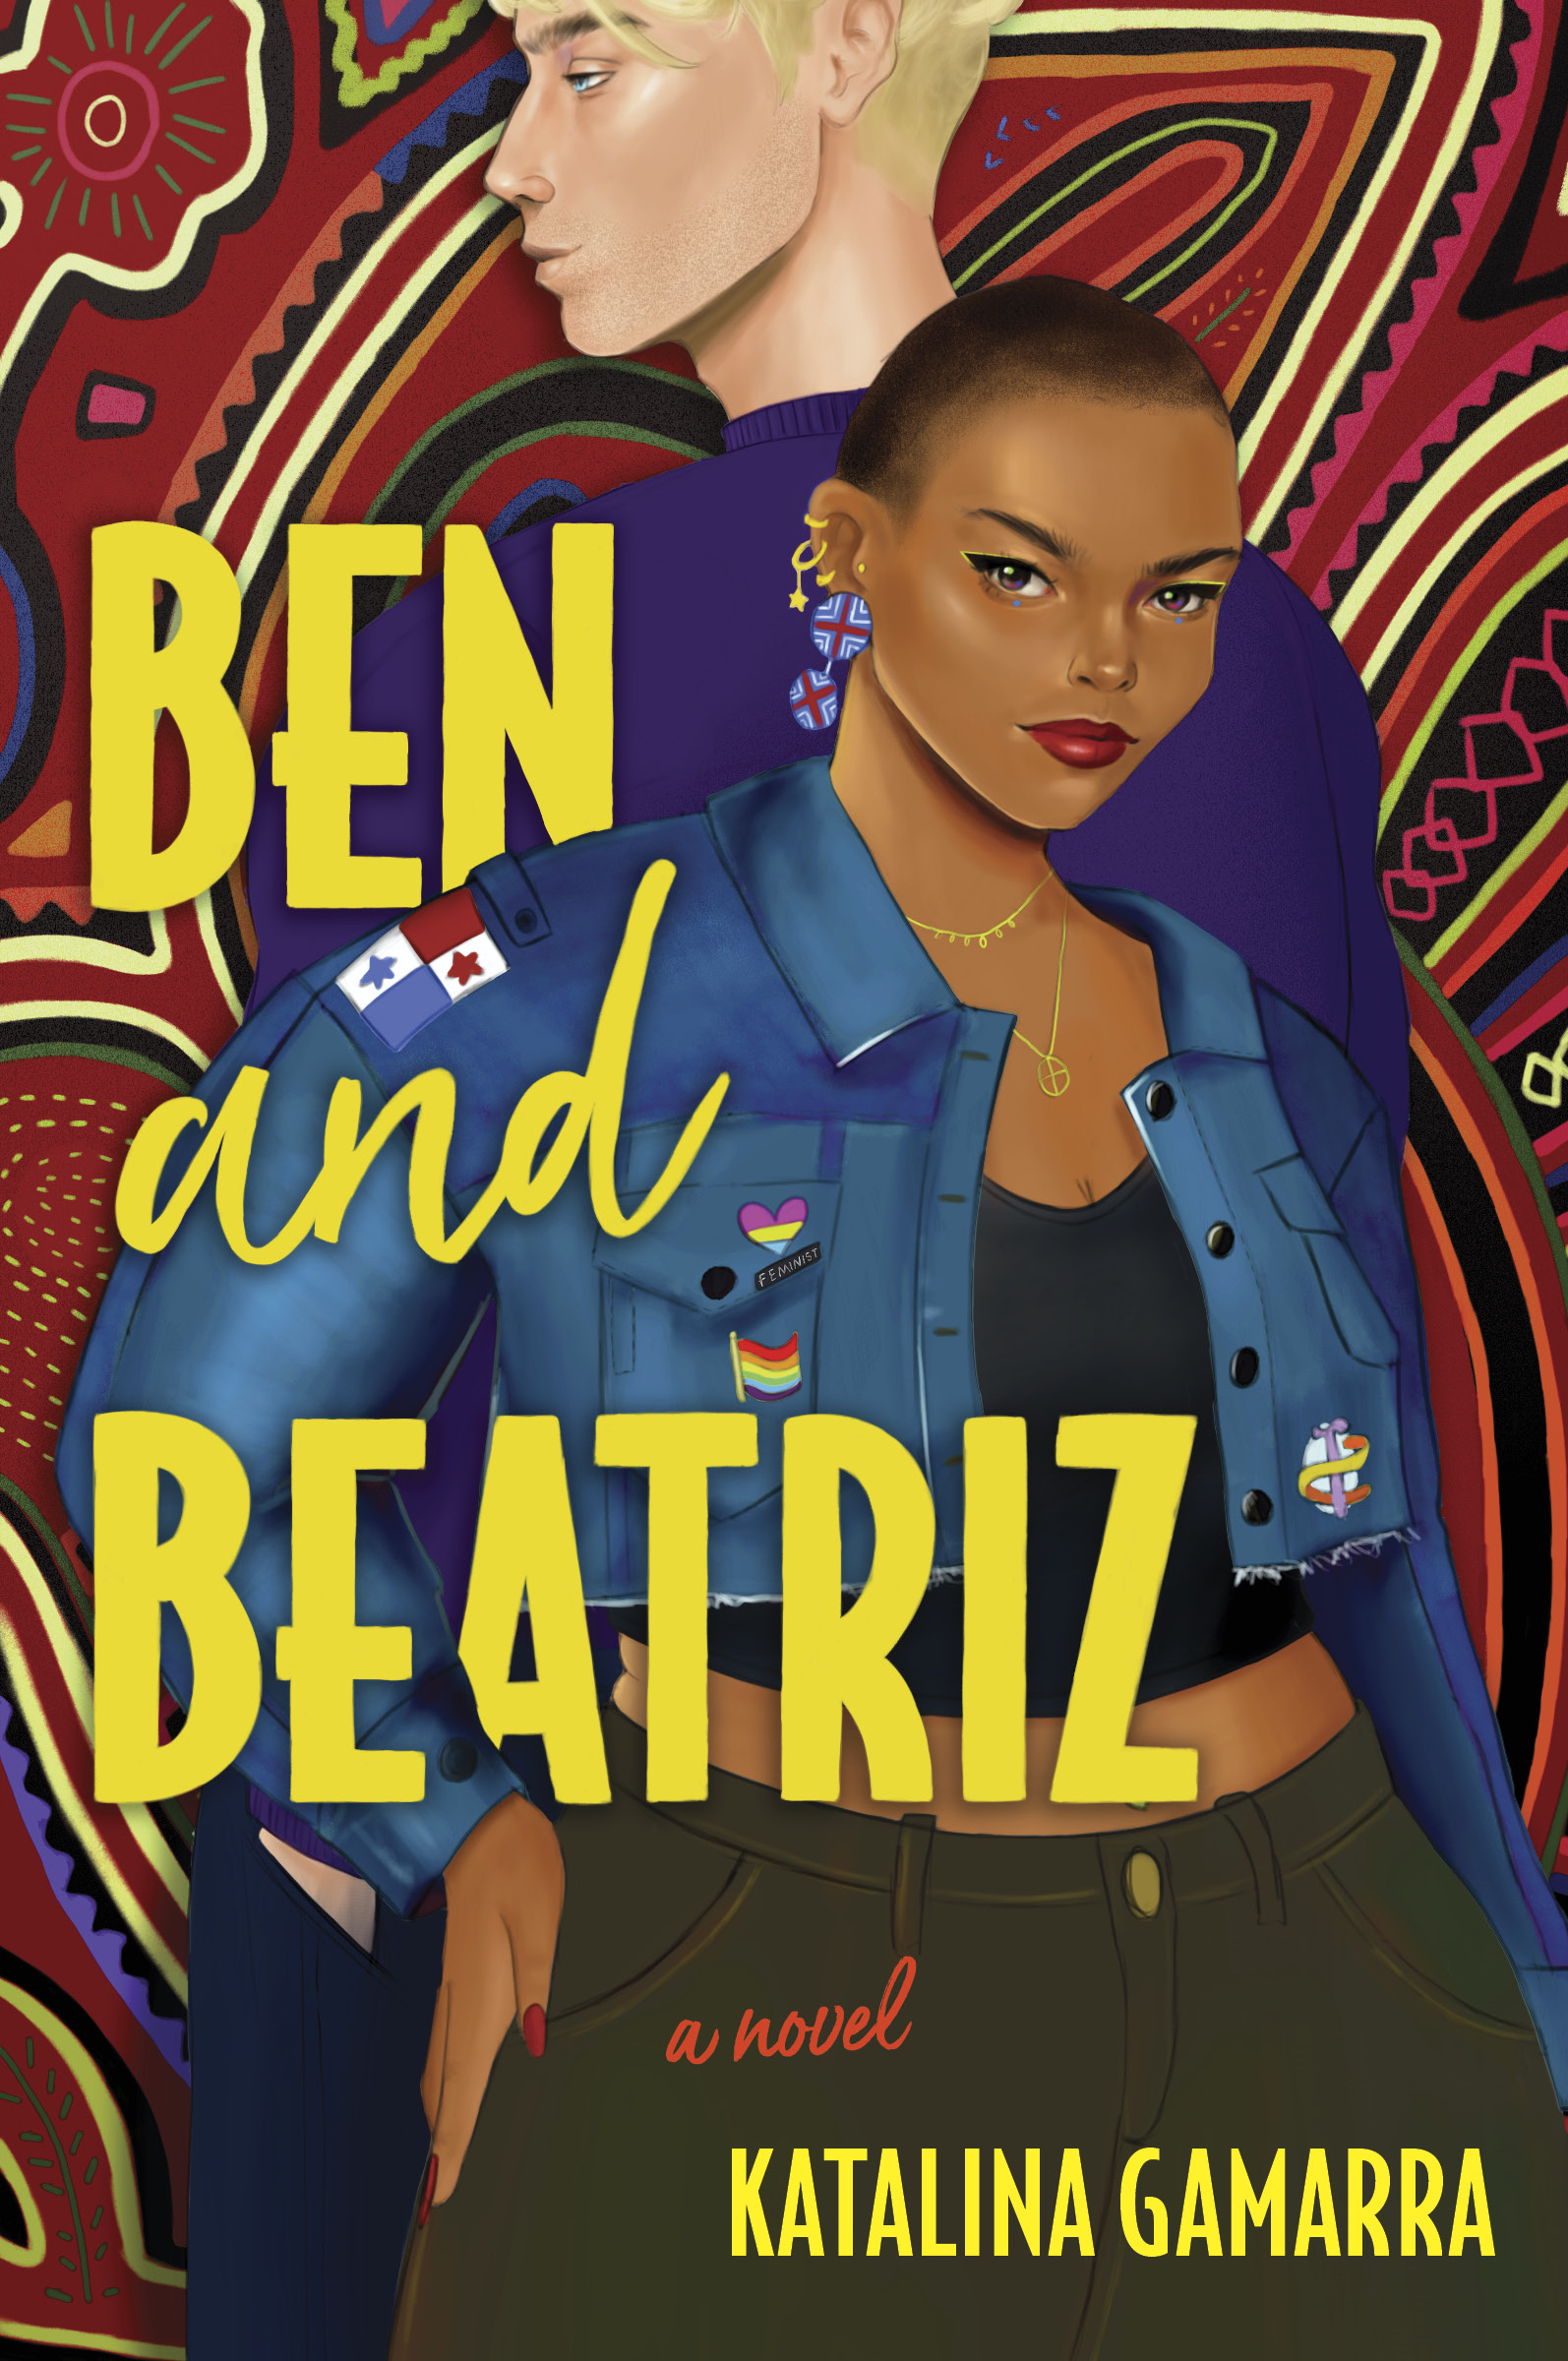 Ben and Beatriz Book Cover